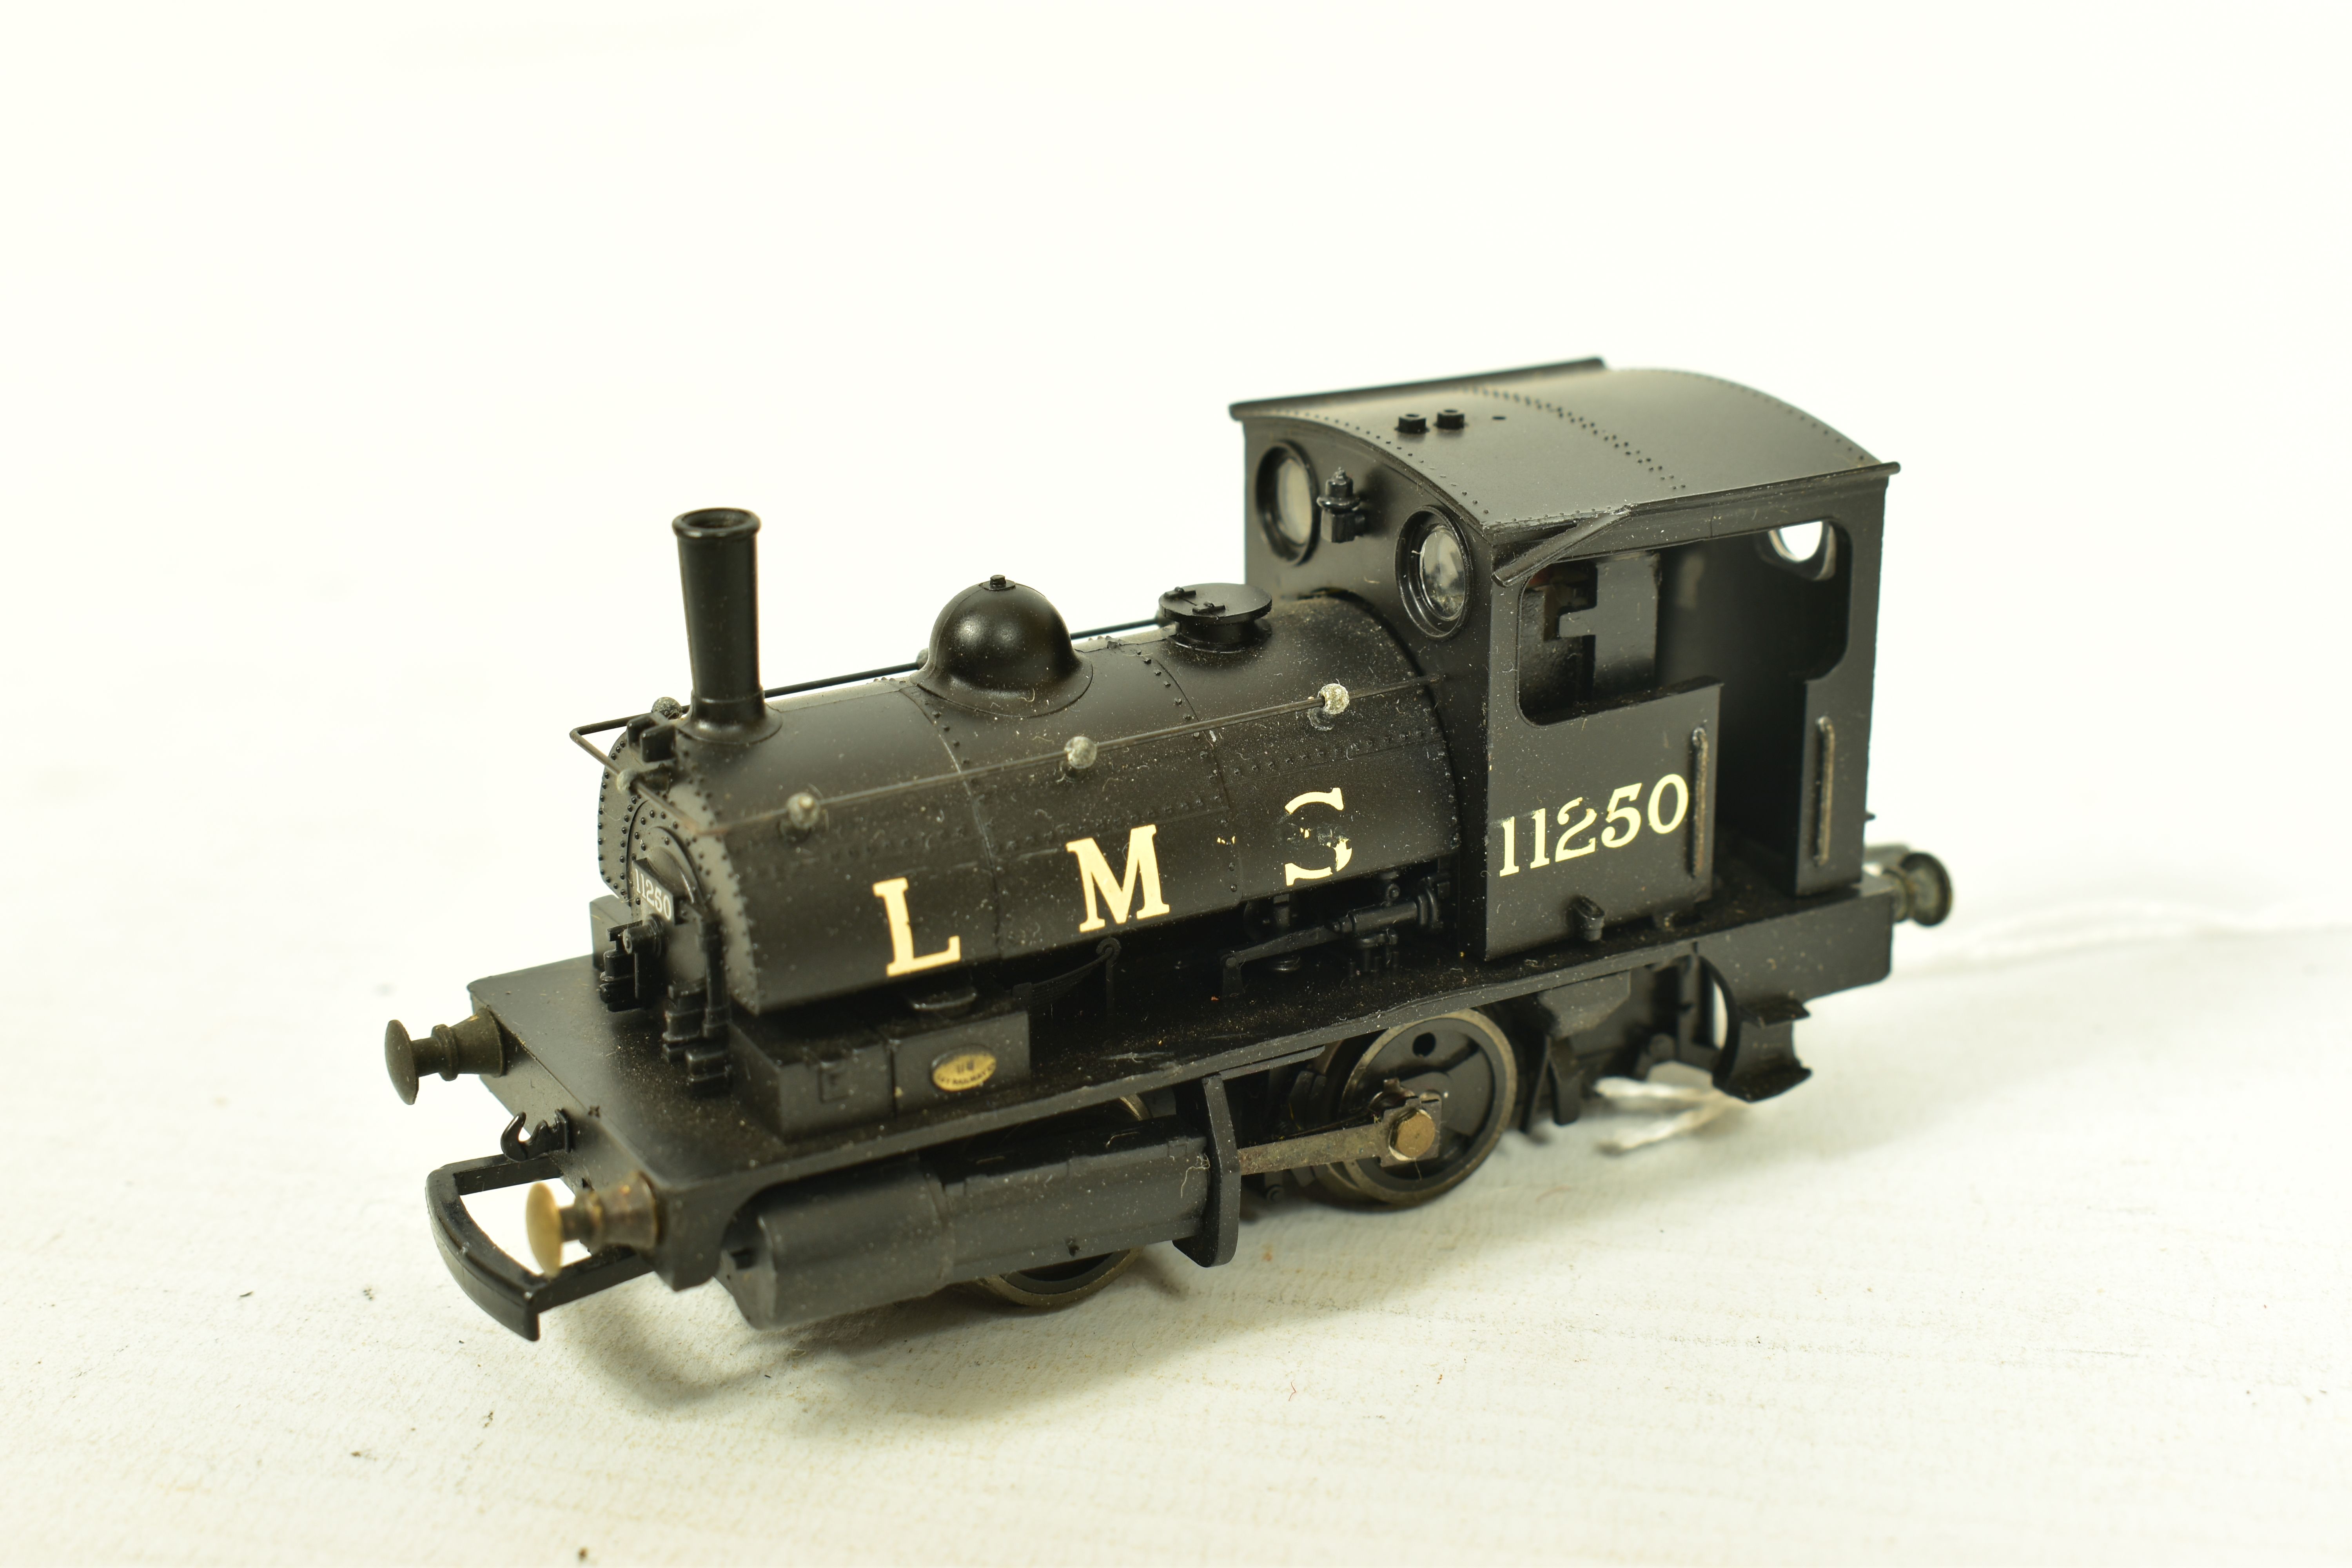 FIVE BOXED HORNBY OO GAUGE TANK LOCOMOTIVES, class B7 Pug, No.11250, L.M.S. black livery (R2065A), - Image 7 of 8